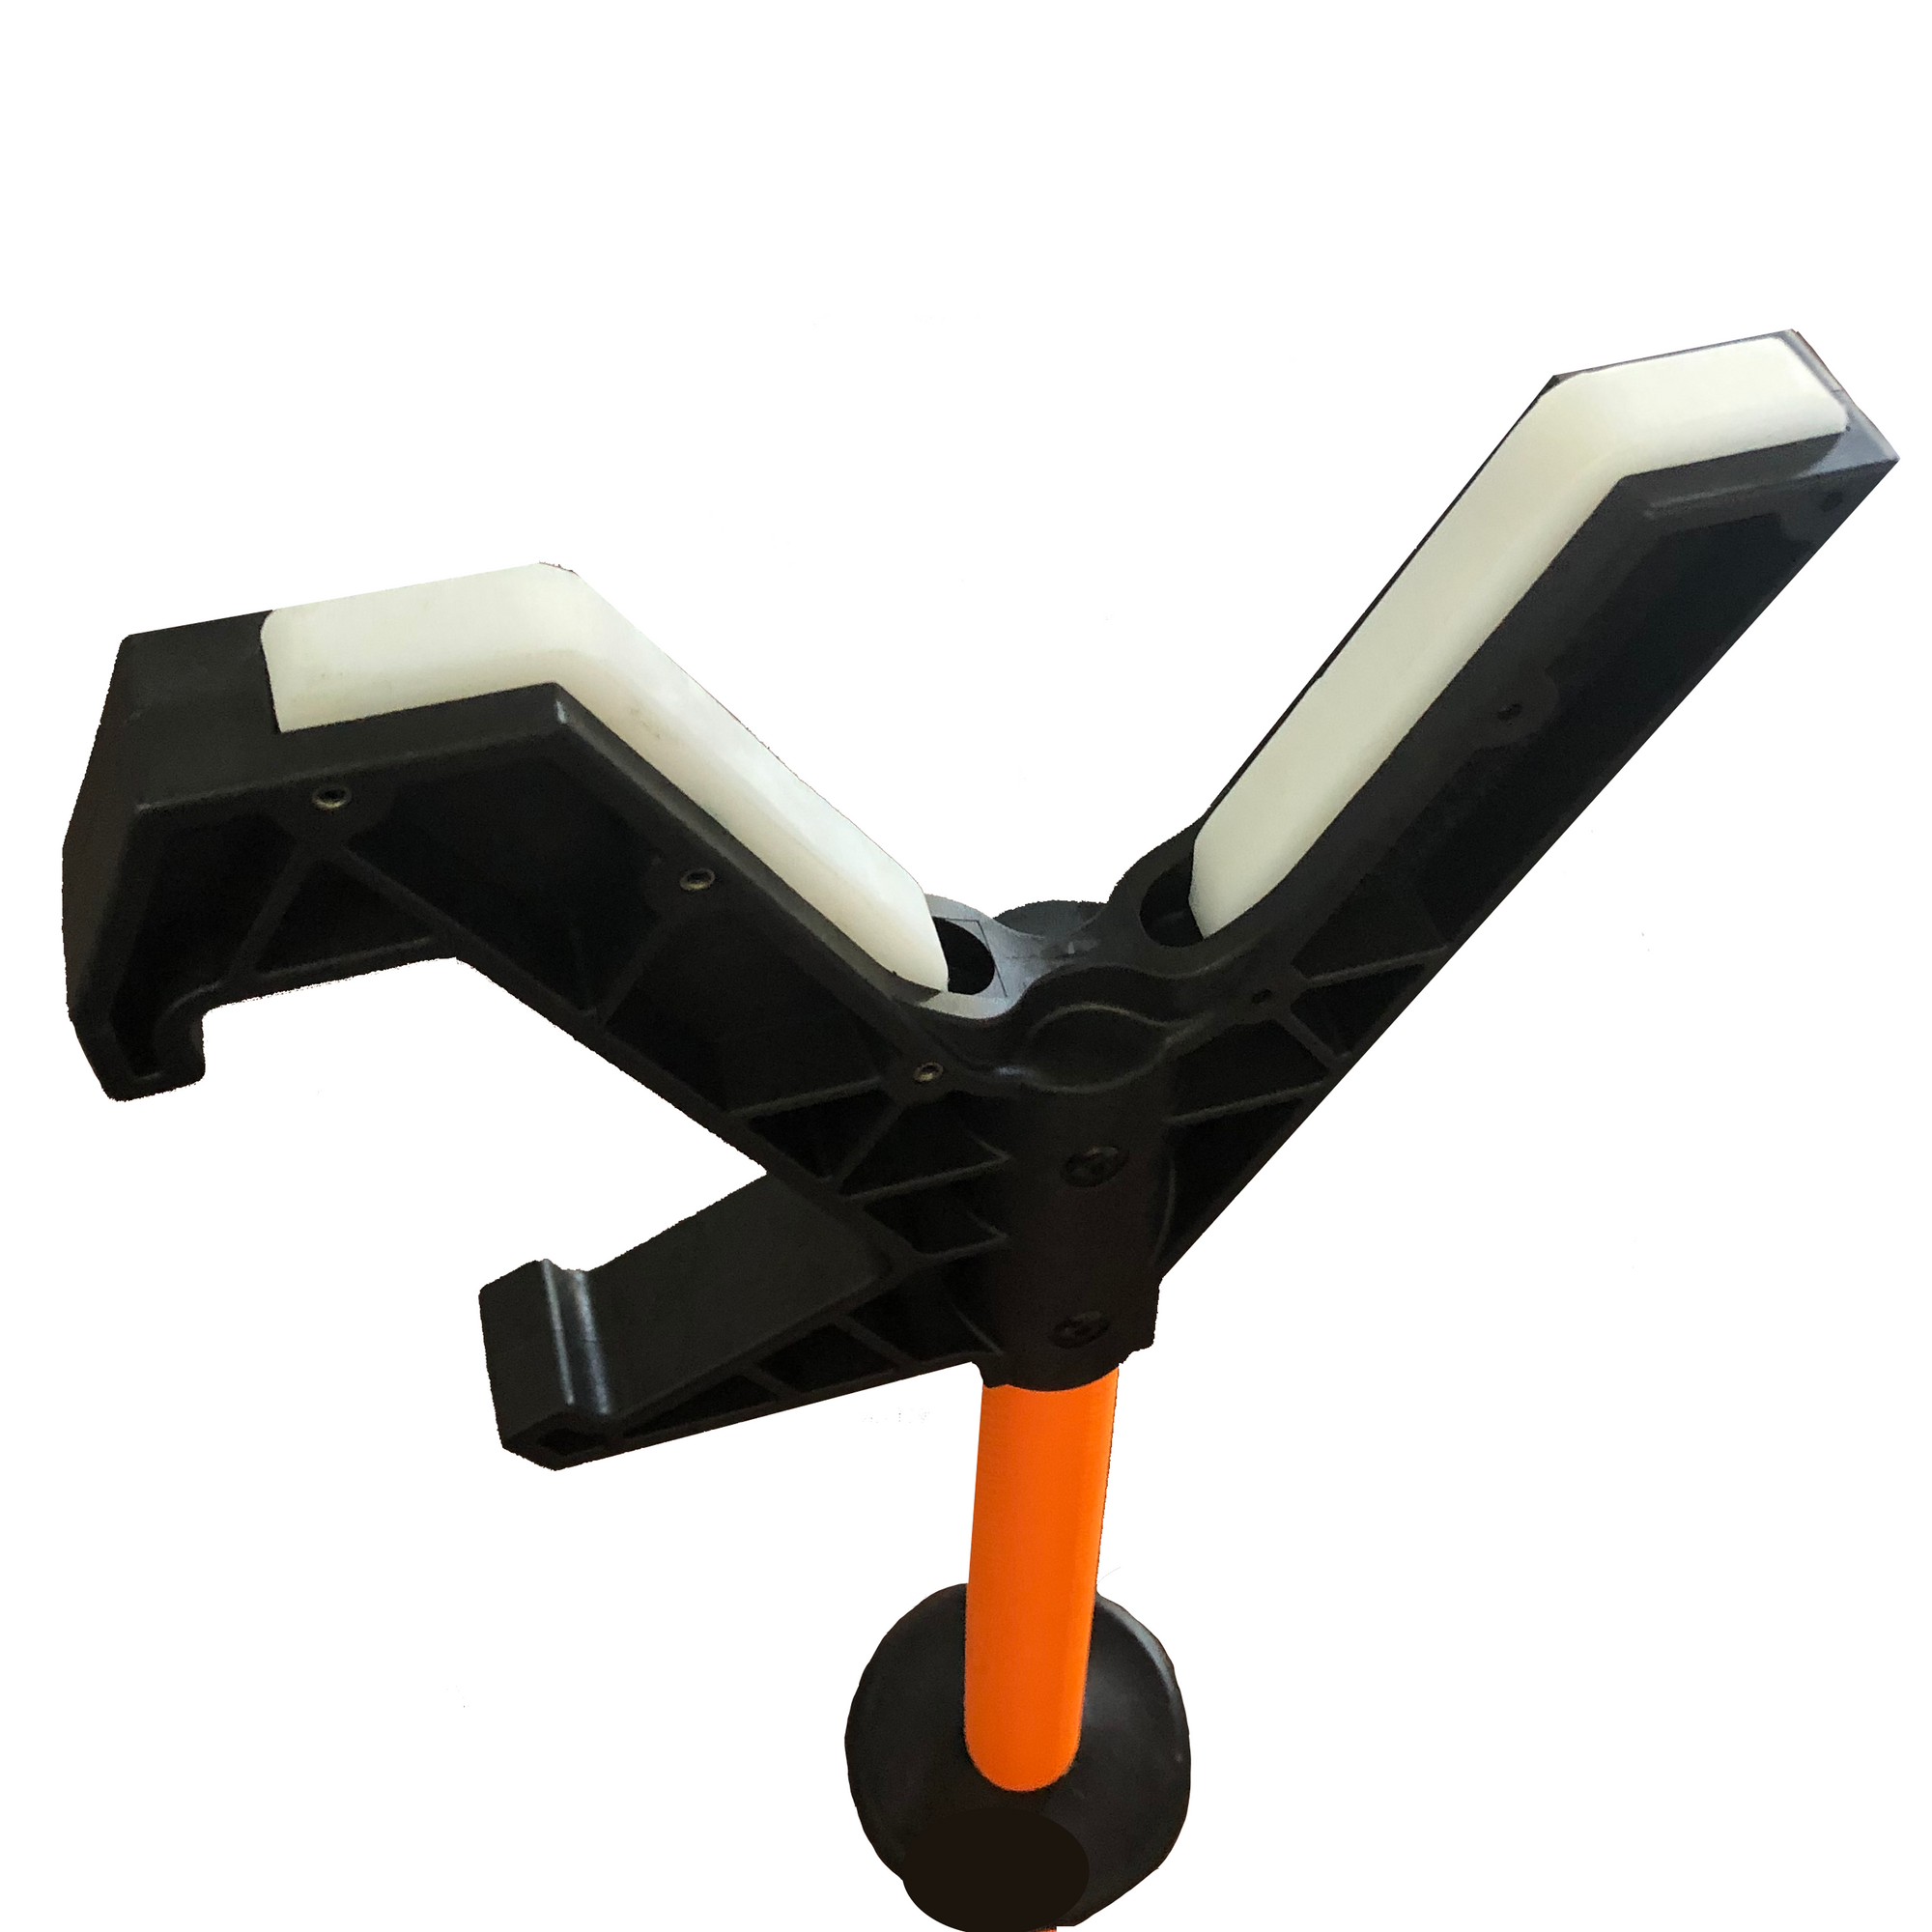 ShoveIt® No Touch Push / Pull Pole Hand Safety Tool